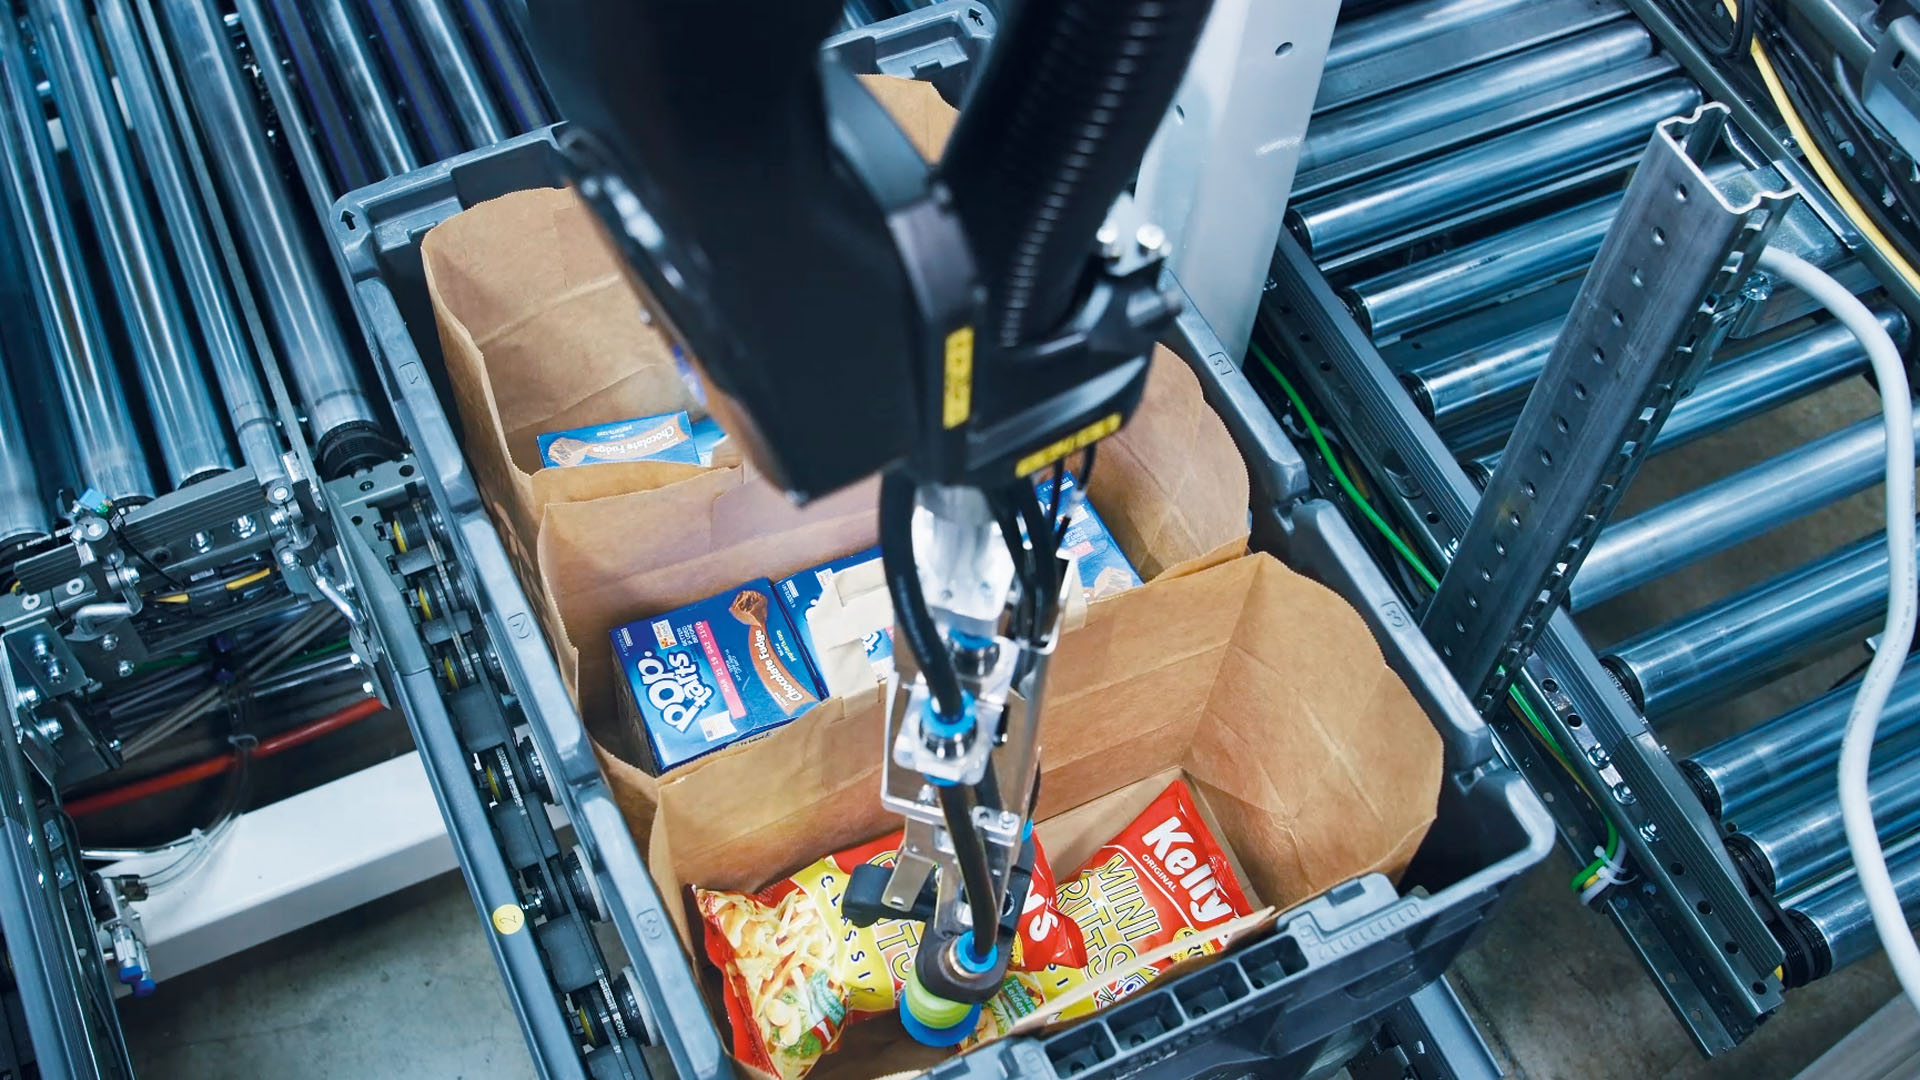 The Pick-it-Easy Robot picks groceries.